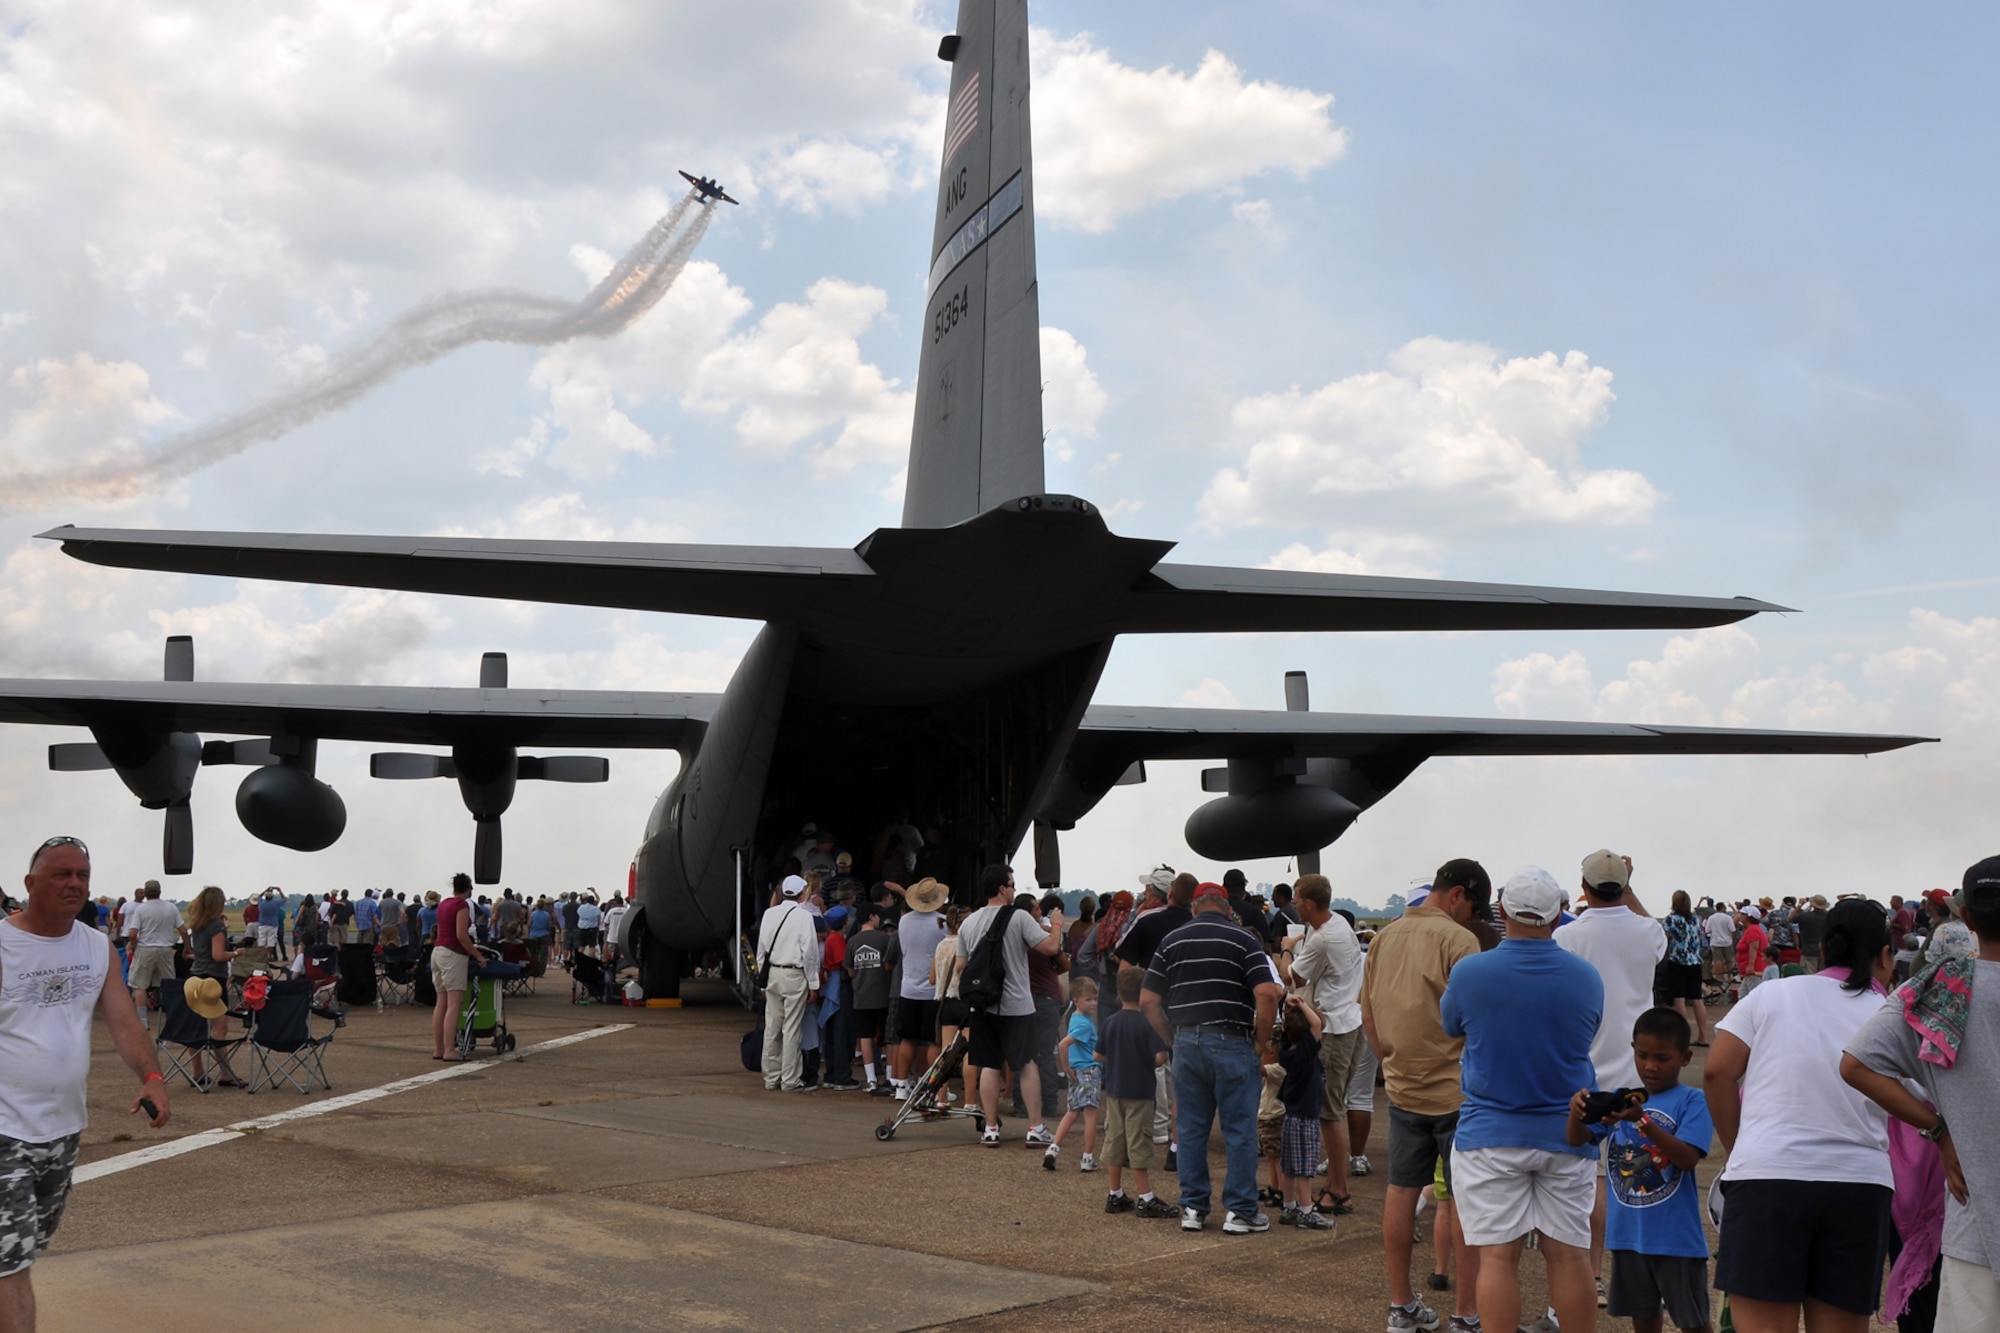 Spectators at the “Wings Over Tyler Air Show” get a tour of a Texas Air National Guard C-130 Hercules as Matt Younkin wows the audience while flying a Twin Beech 18 at the Tyler Pounds Regional Airport in Tyler, Texas, July 3, 2011. Although the Beech 18 was not designed for aerobatic flight, Younkin showed the crowd it could be done. (U.S. Air Force photo/Tech. Sgt. Jeff Walston)